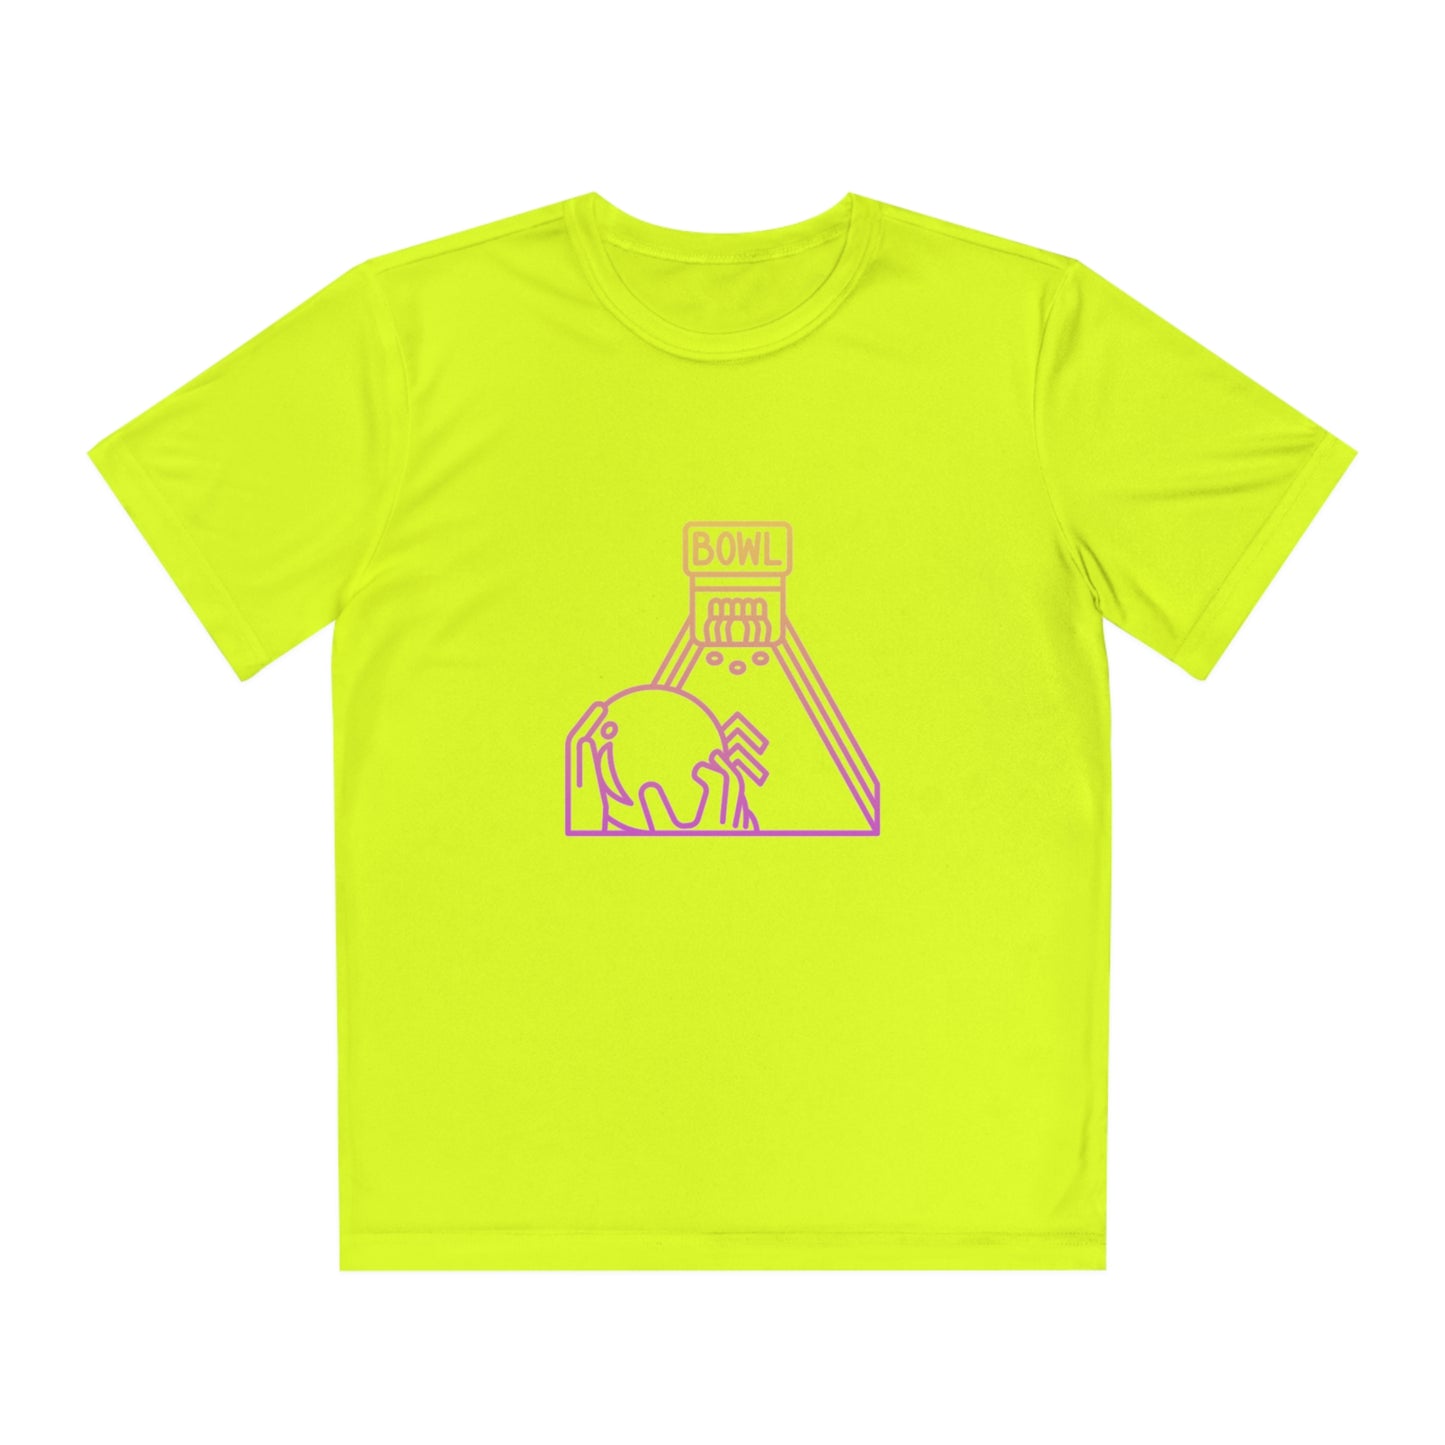 Youth Competitor Tee #1: Bowling